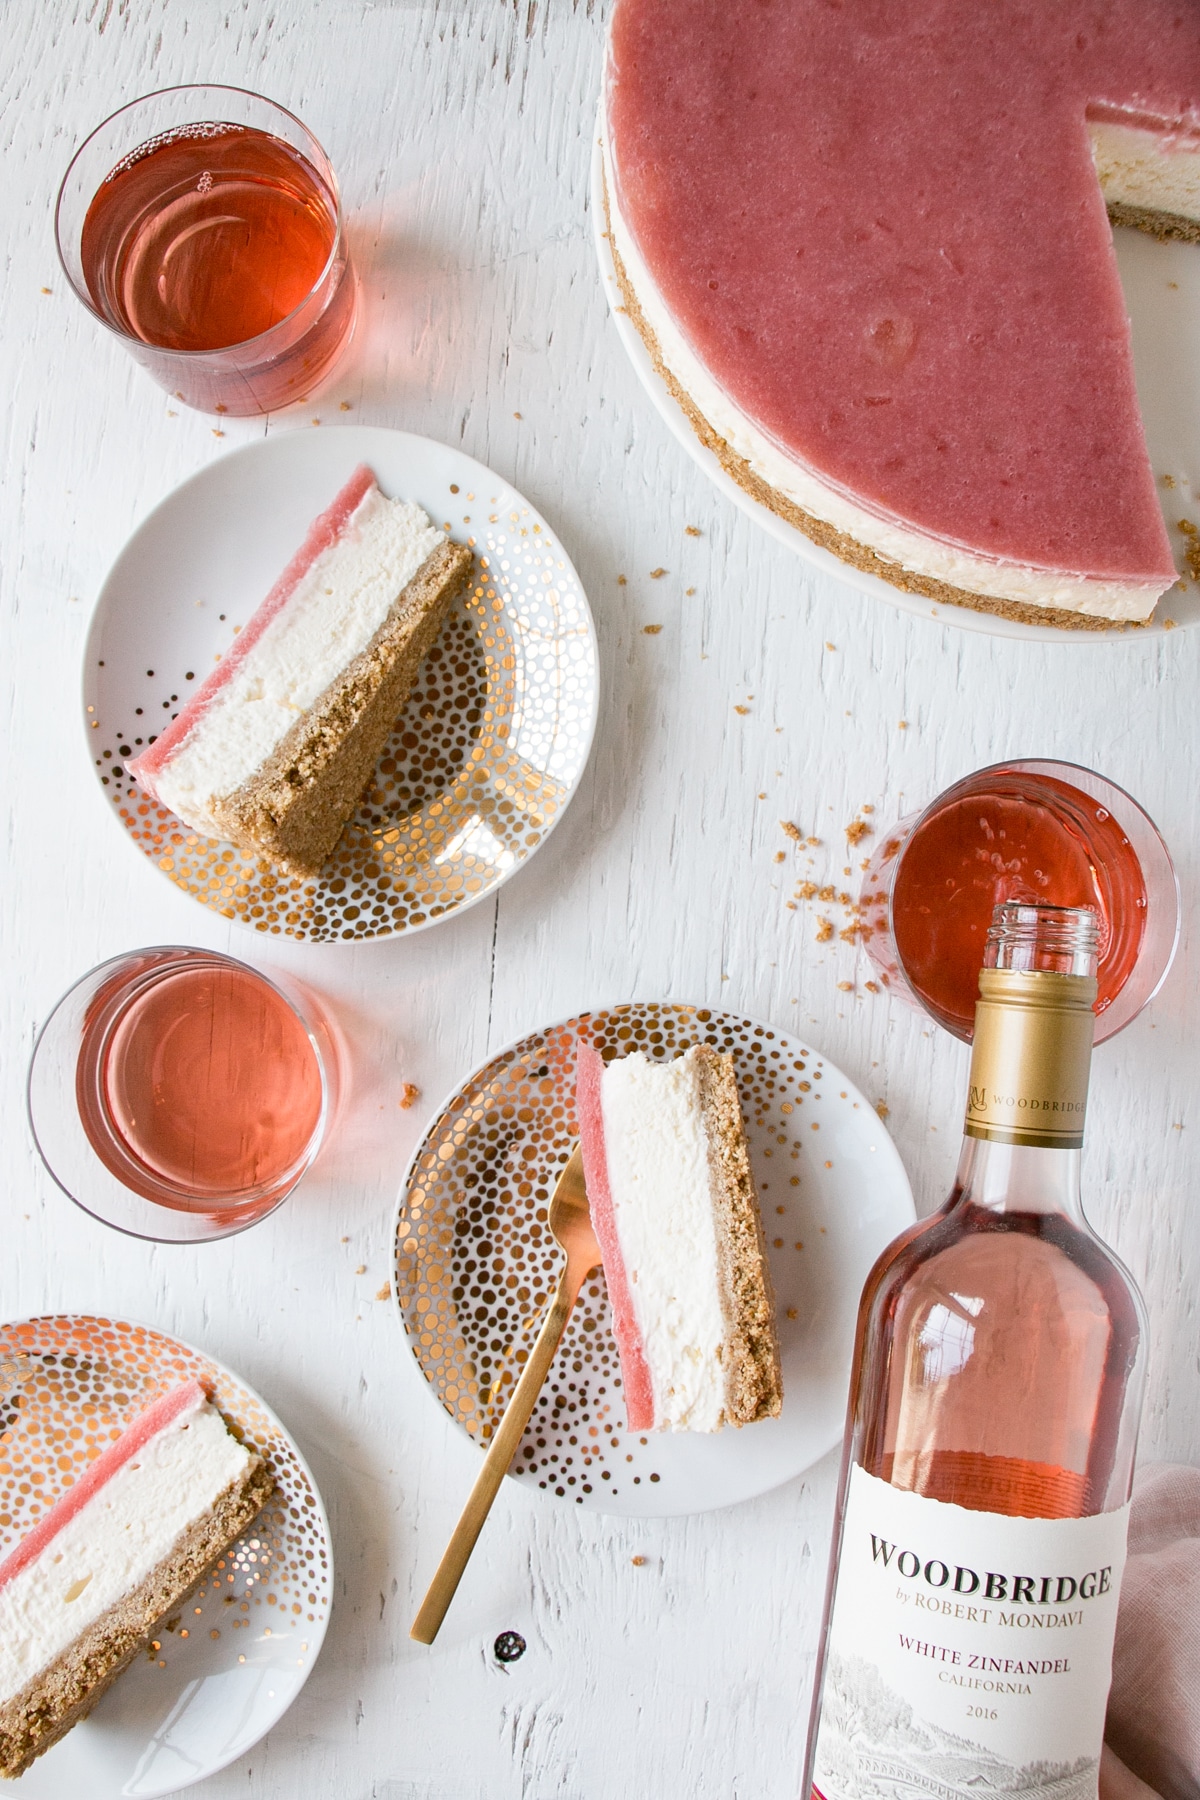 Slices of a No Bake Rhubarb Cheesecake on plates and glasses of rose wine.